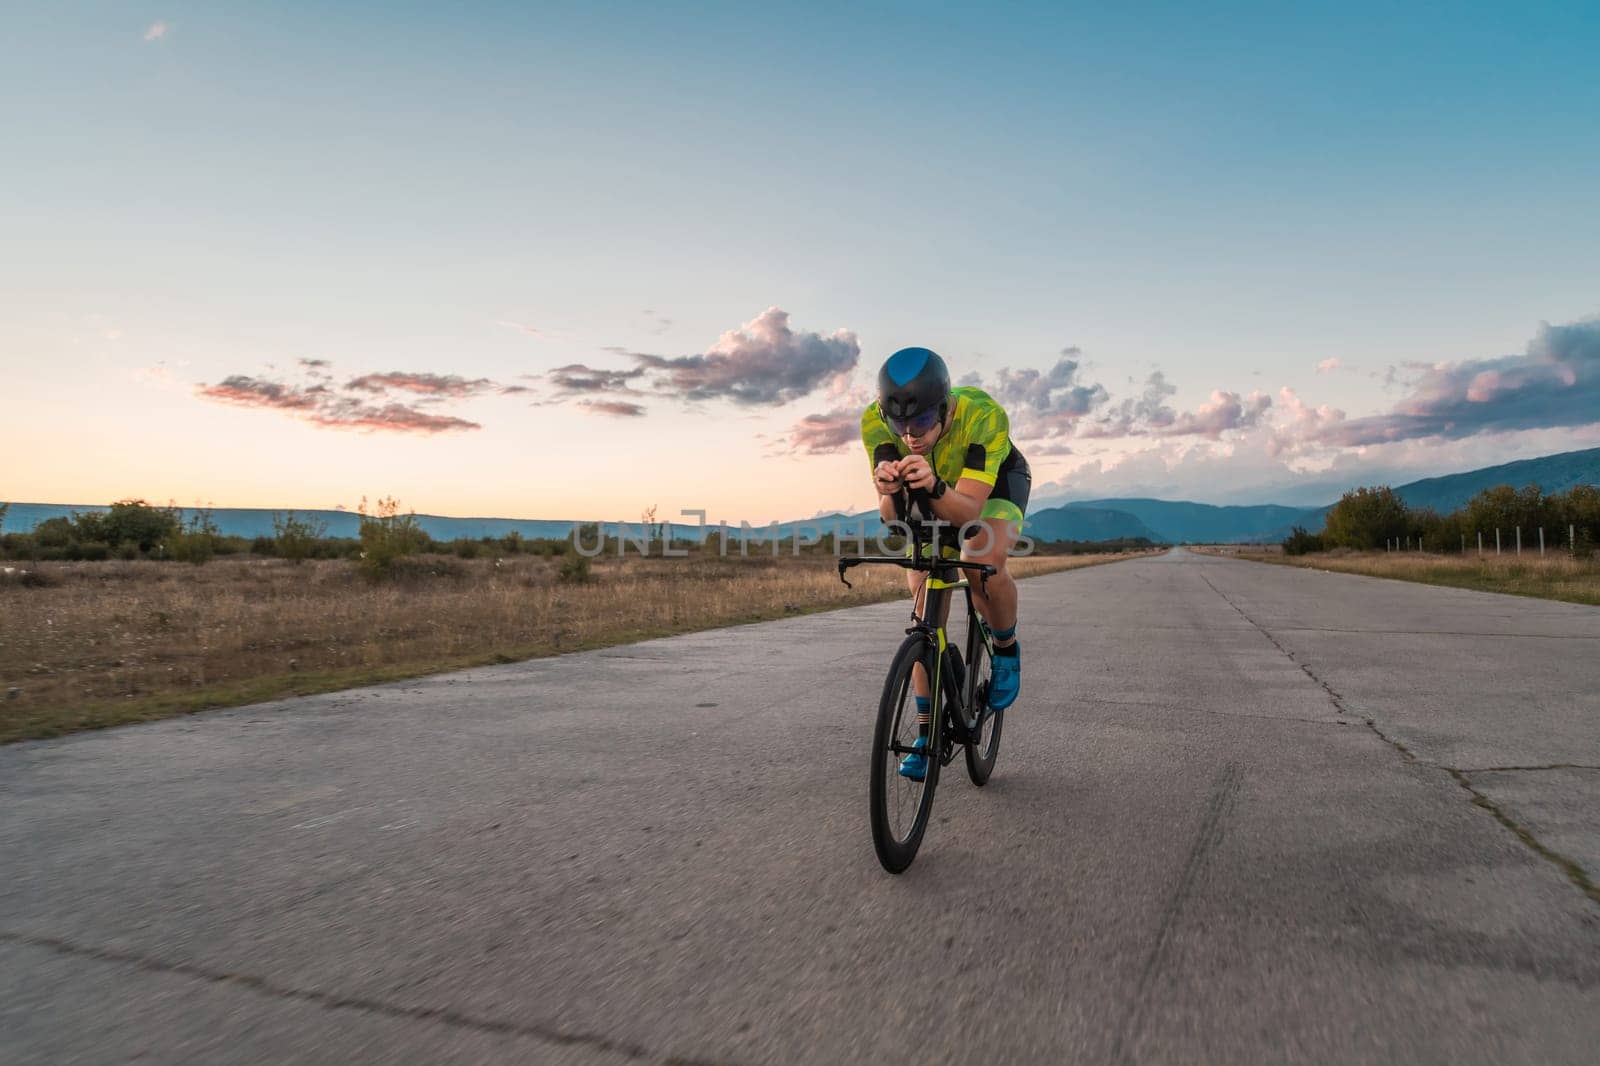 Triathlete riding his bicycle during sunset, preparing for a marathon. The warm colors of the sky provide a beautiful backdrop for his determined and focused effort. by dotshock